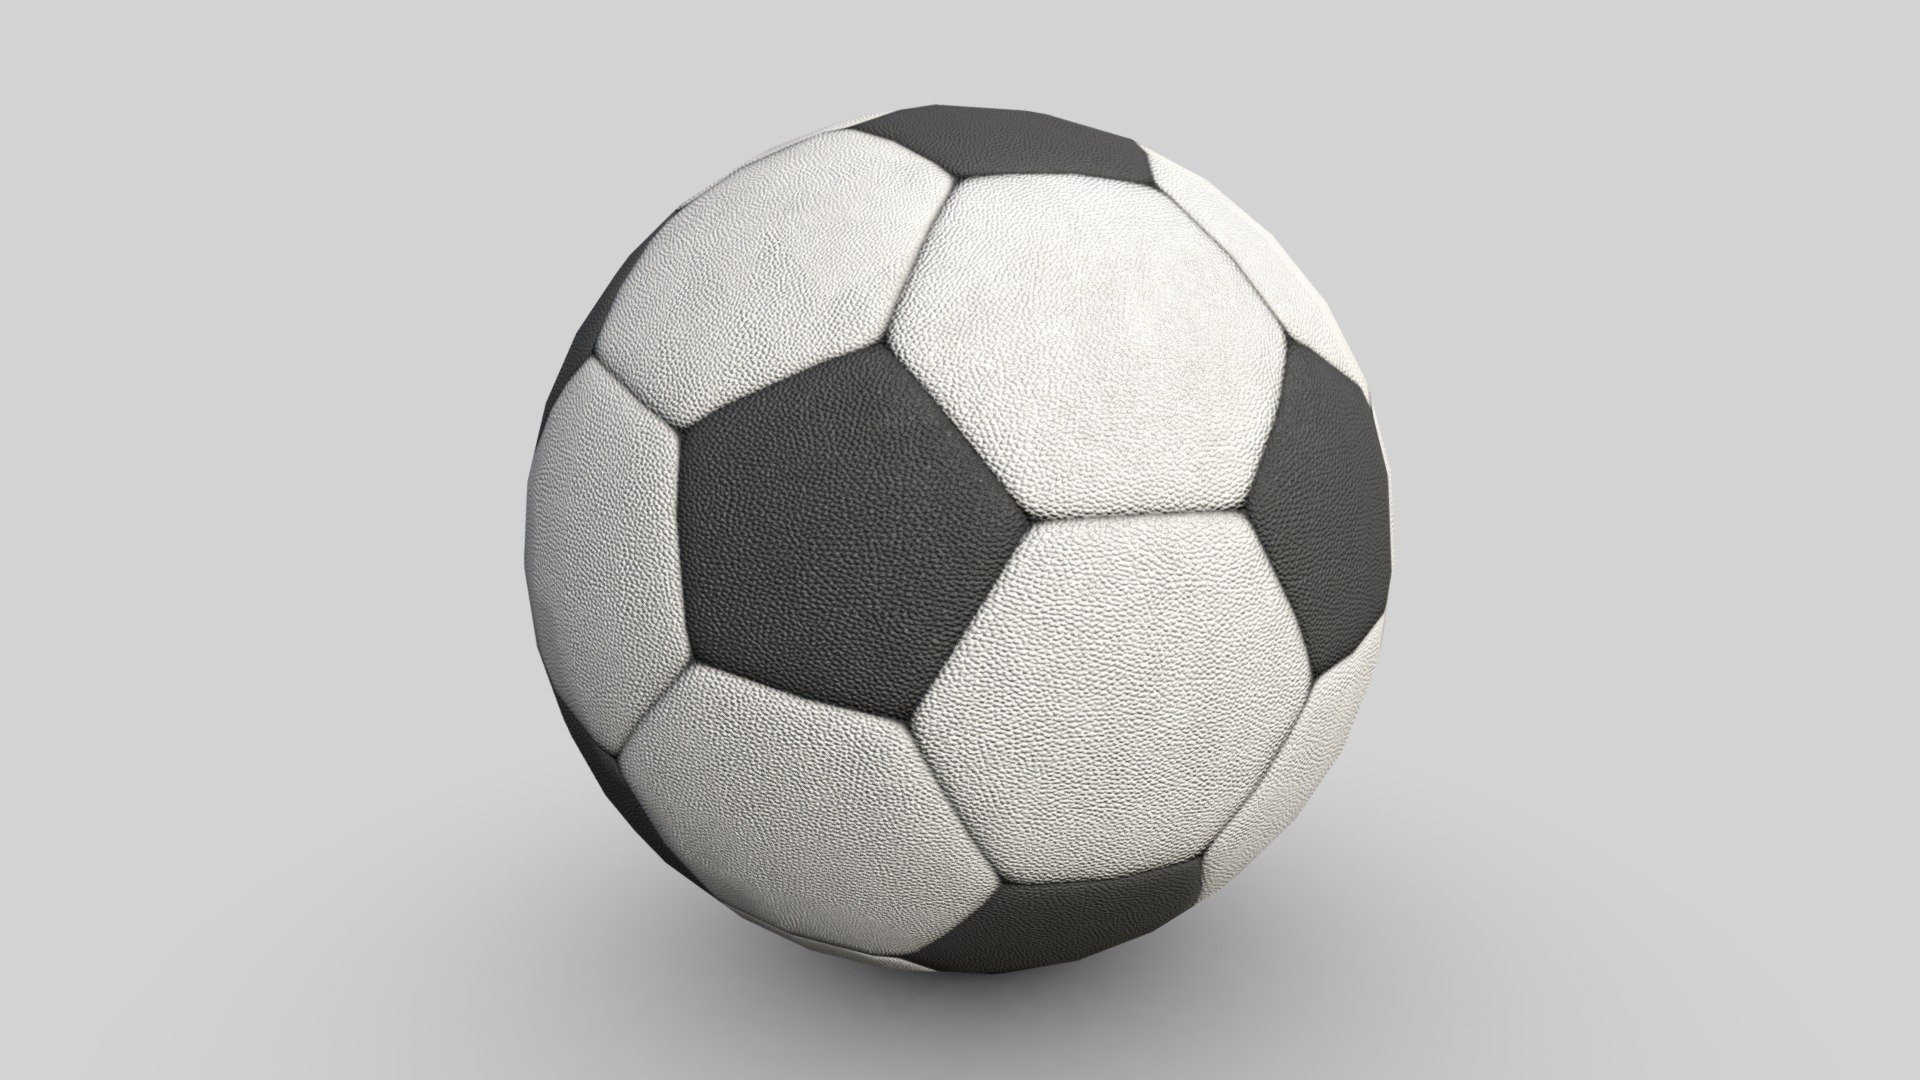 Soccer ball modeling and texturing, using substance painter and maya textures size 4096 x 4096 ..... 3d model